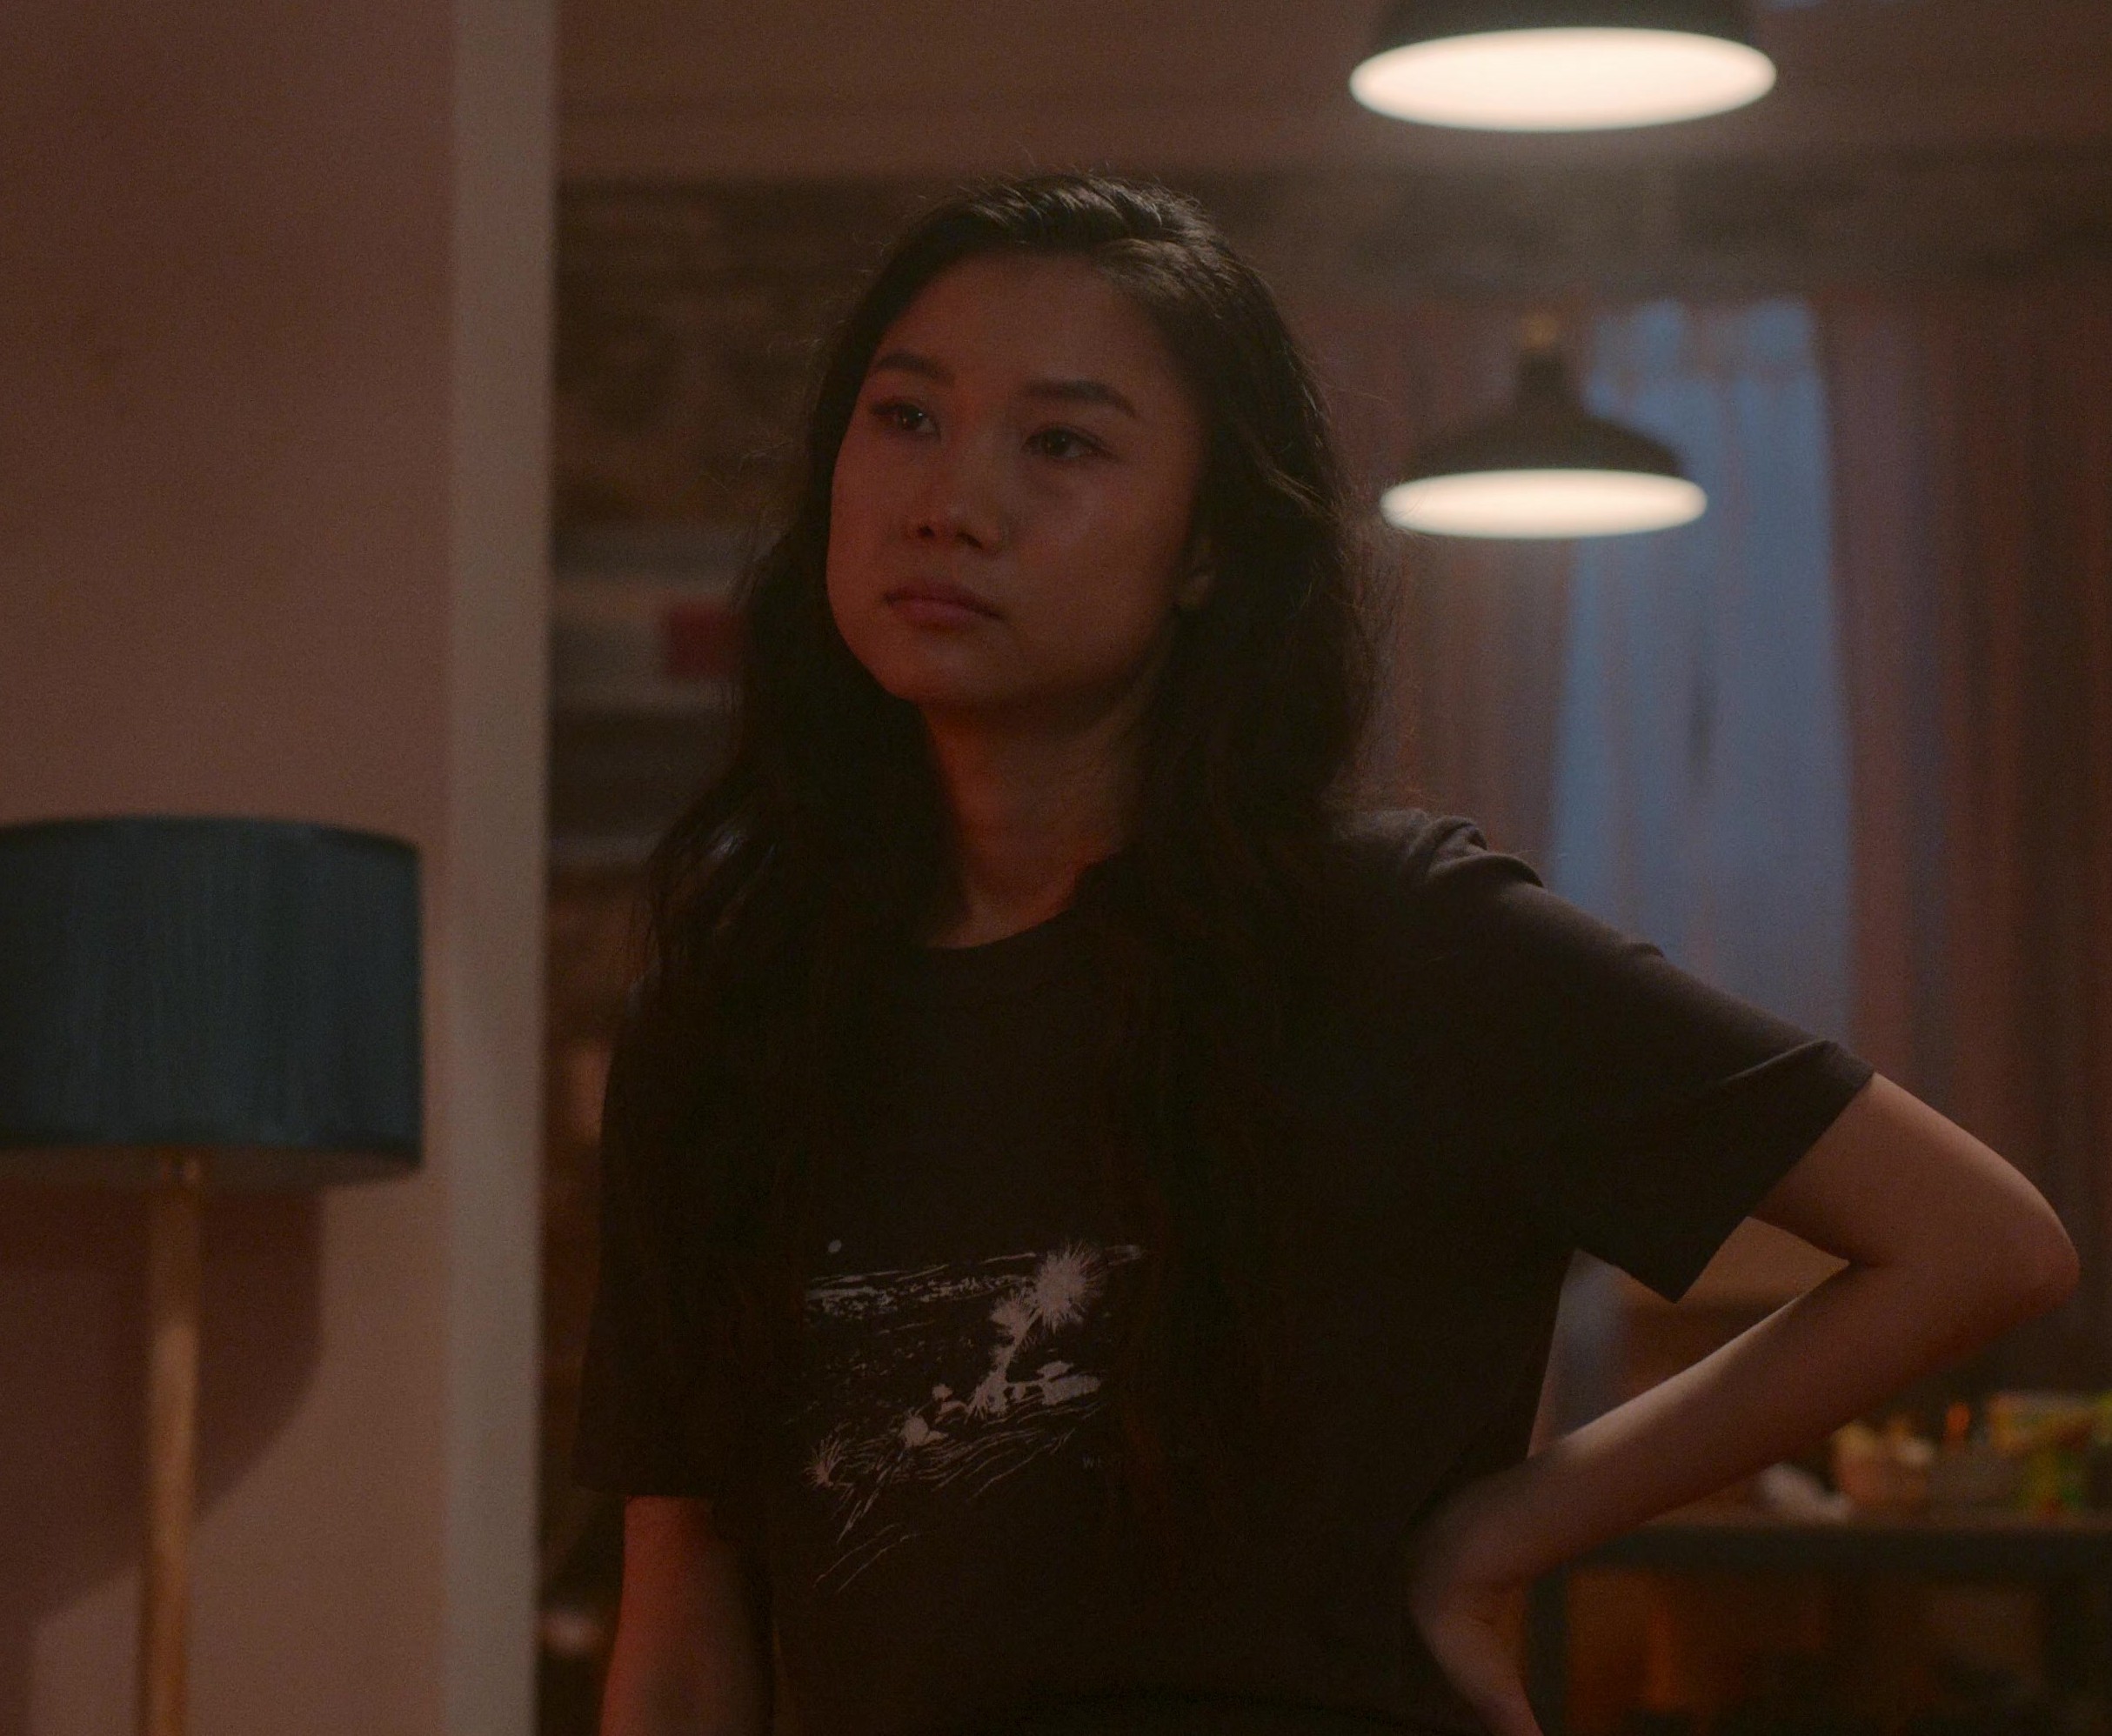 Worn on Five Blind Dates (2024) Movie - Black Graphic Tee with Vintage Nature Landscape Print Worn by Shuang Hu as Lia